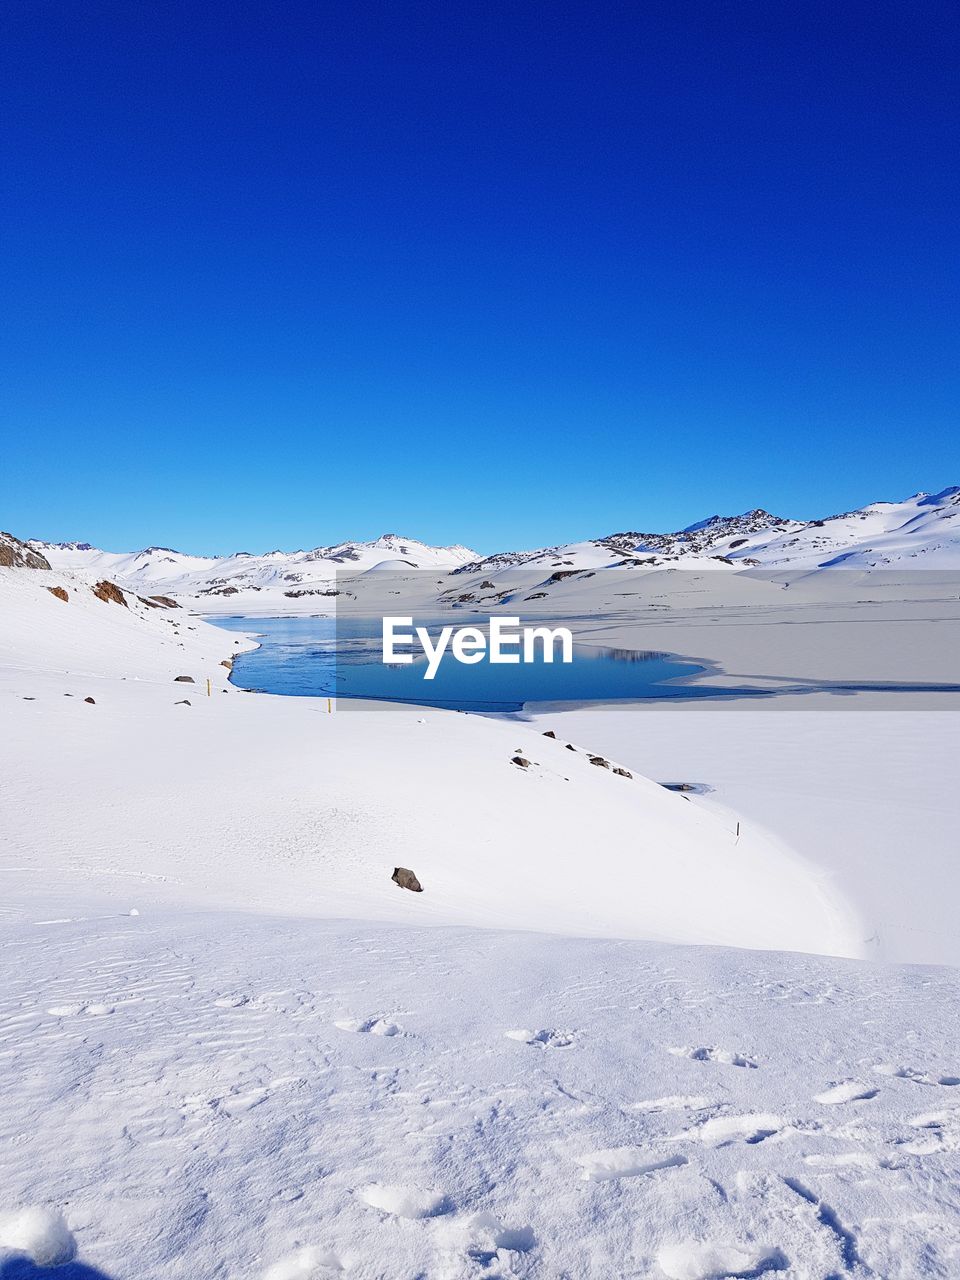 SCENIC VIEW OF SNOW COVERED LANDSCAPE AGAINST CLEAR BLUE SKY